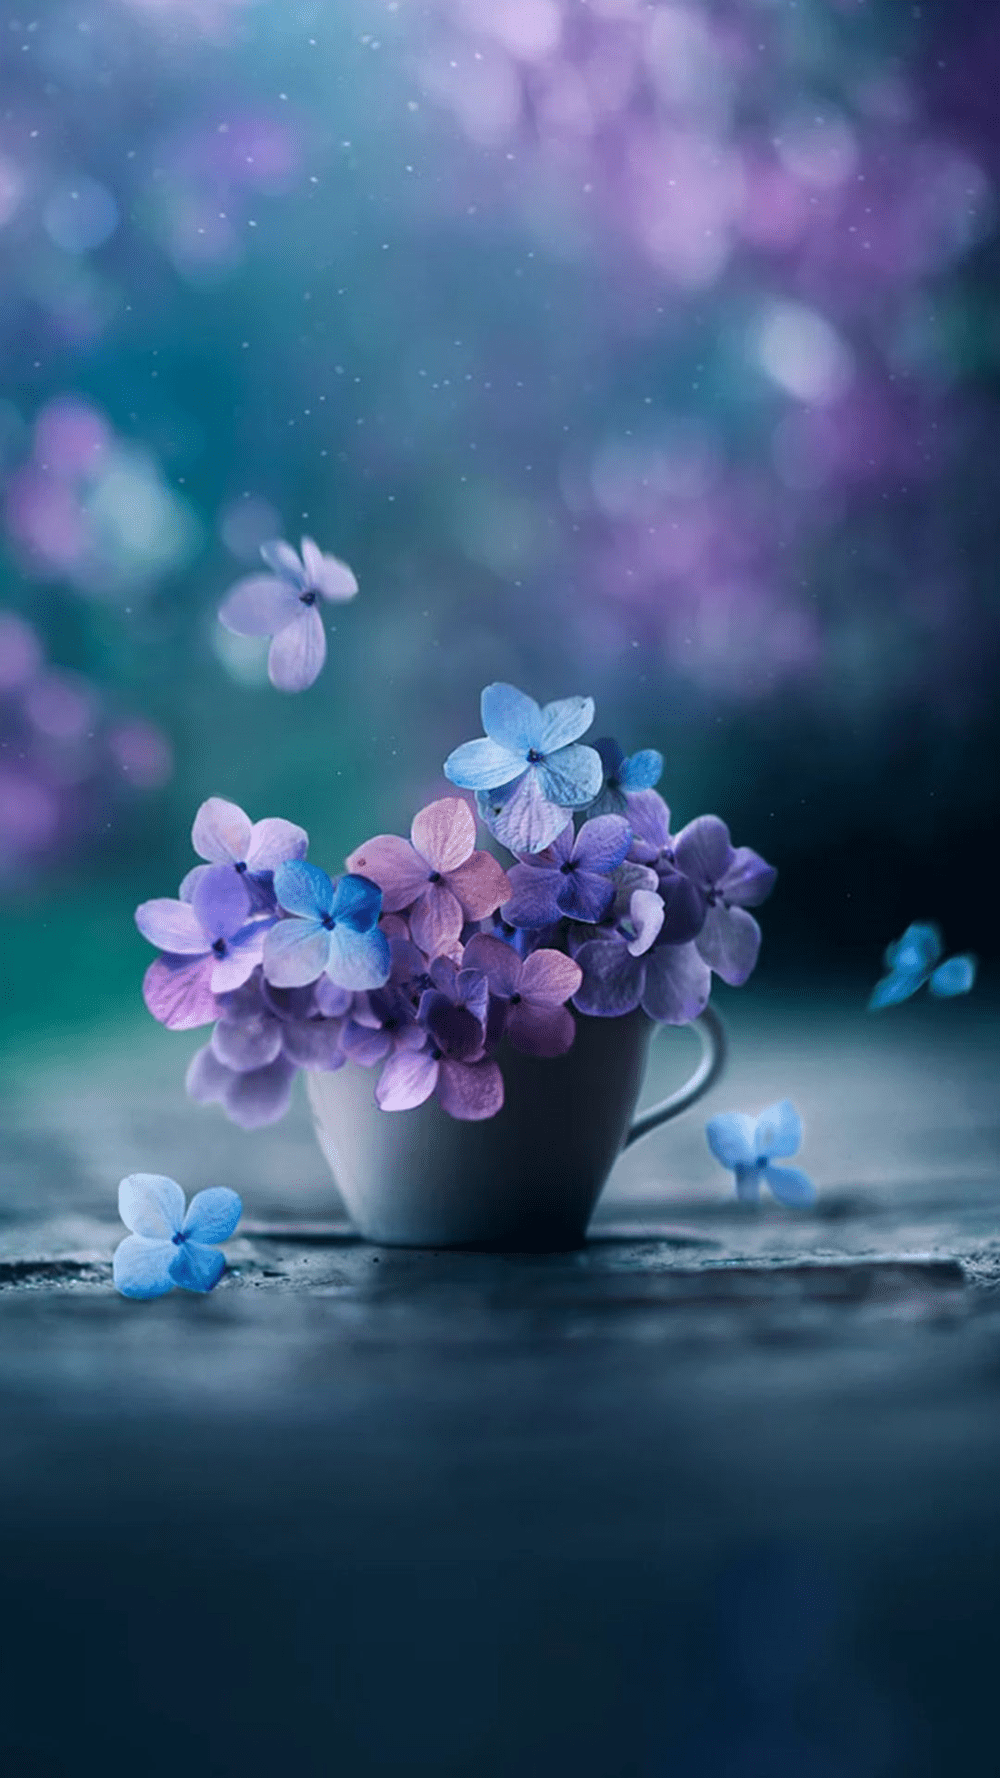 Pretty Flowers iPhone Wallpapers - Top Free Pretty Flowers iPhone